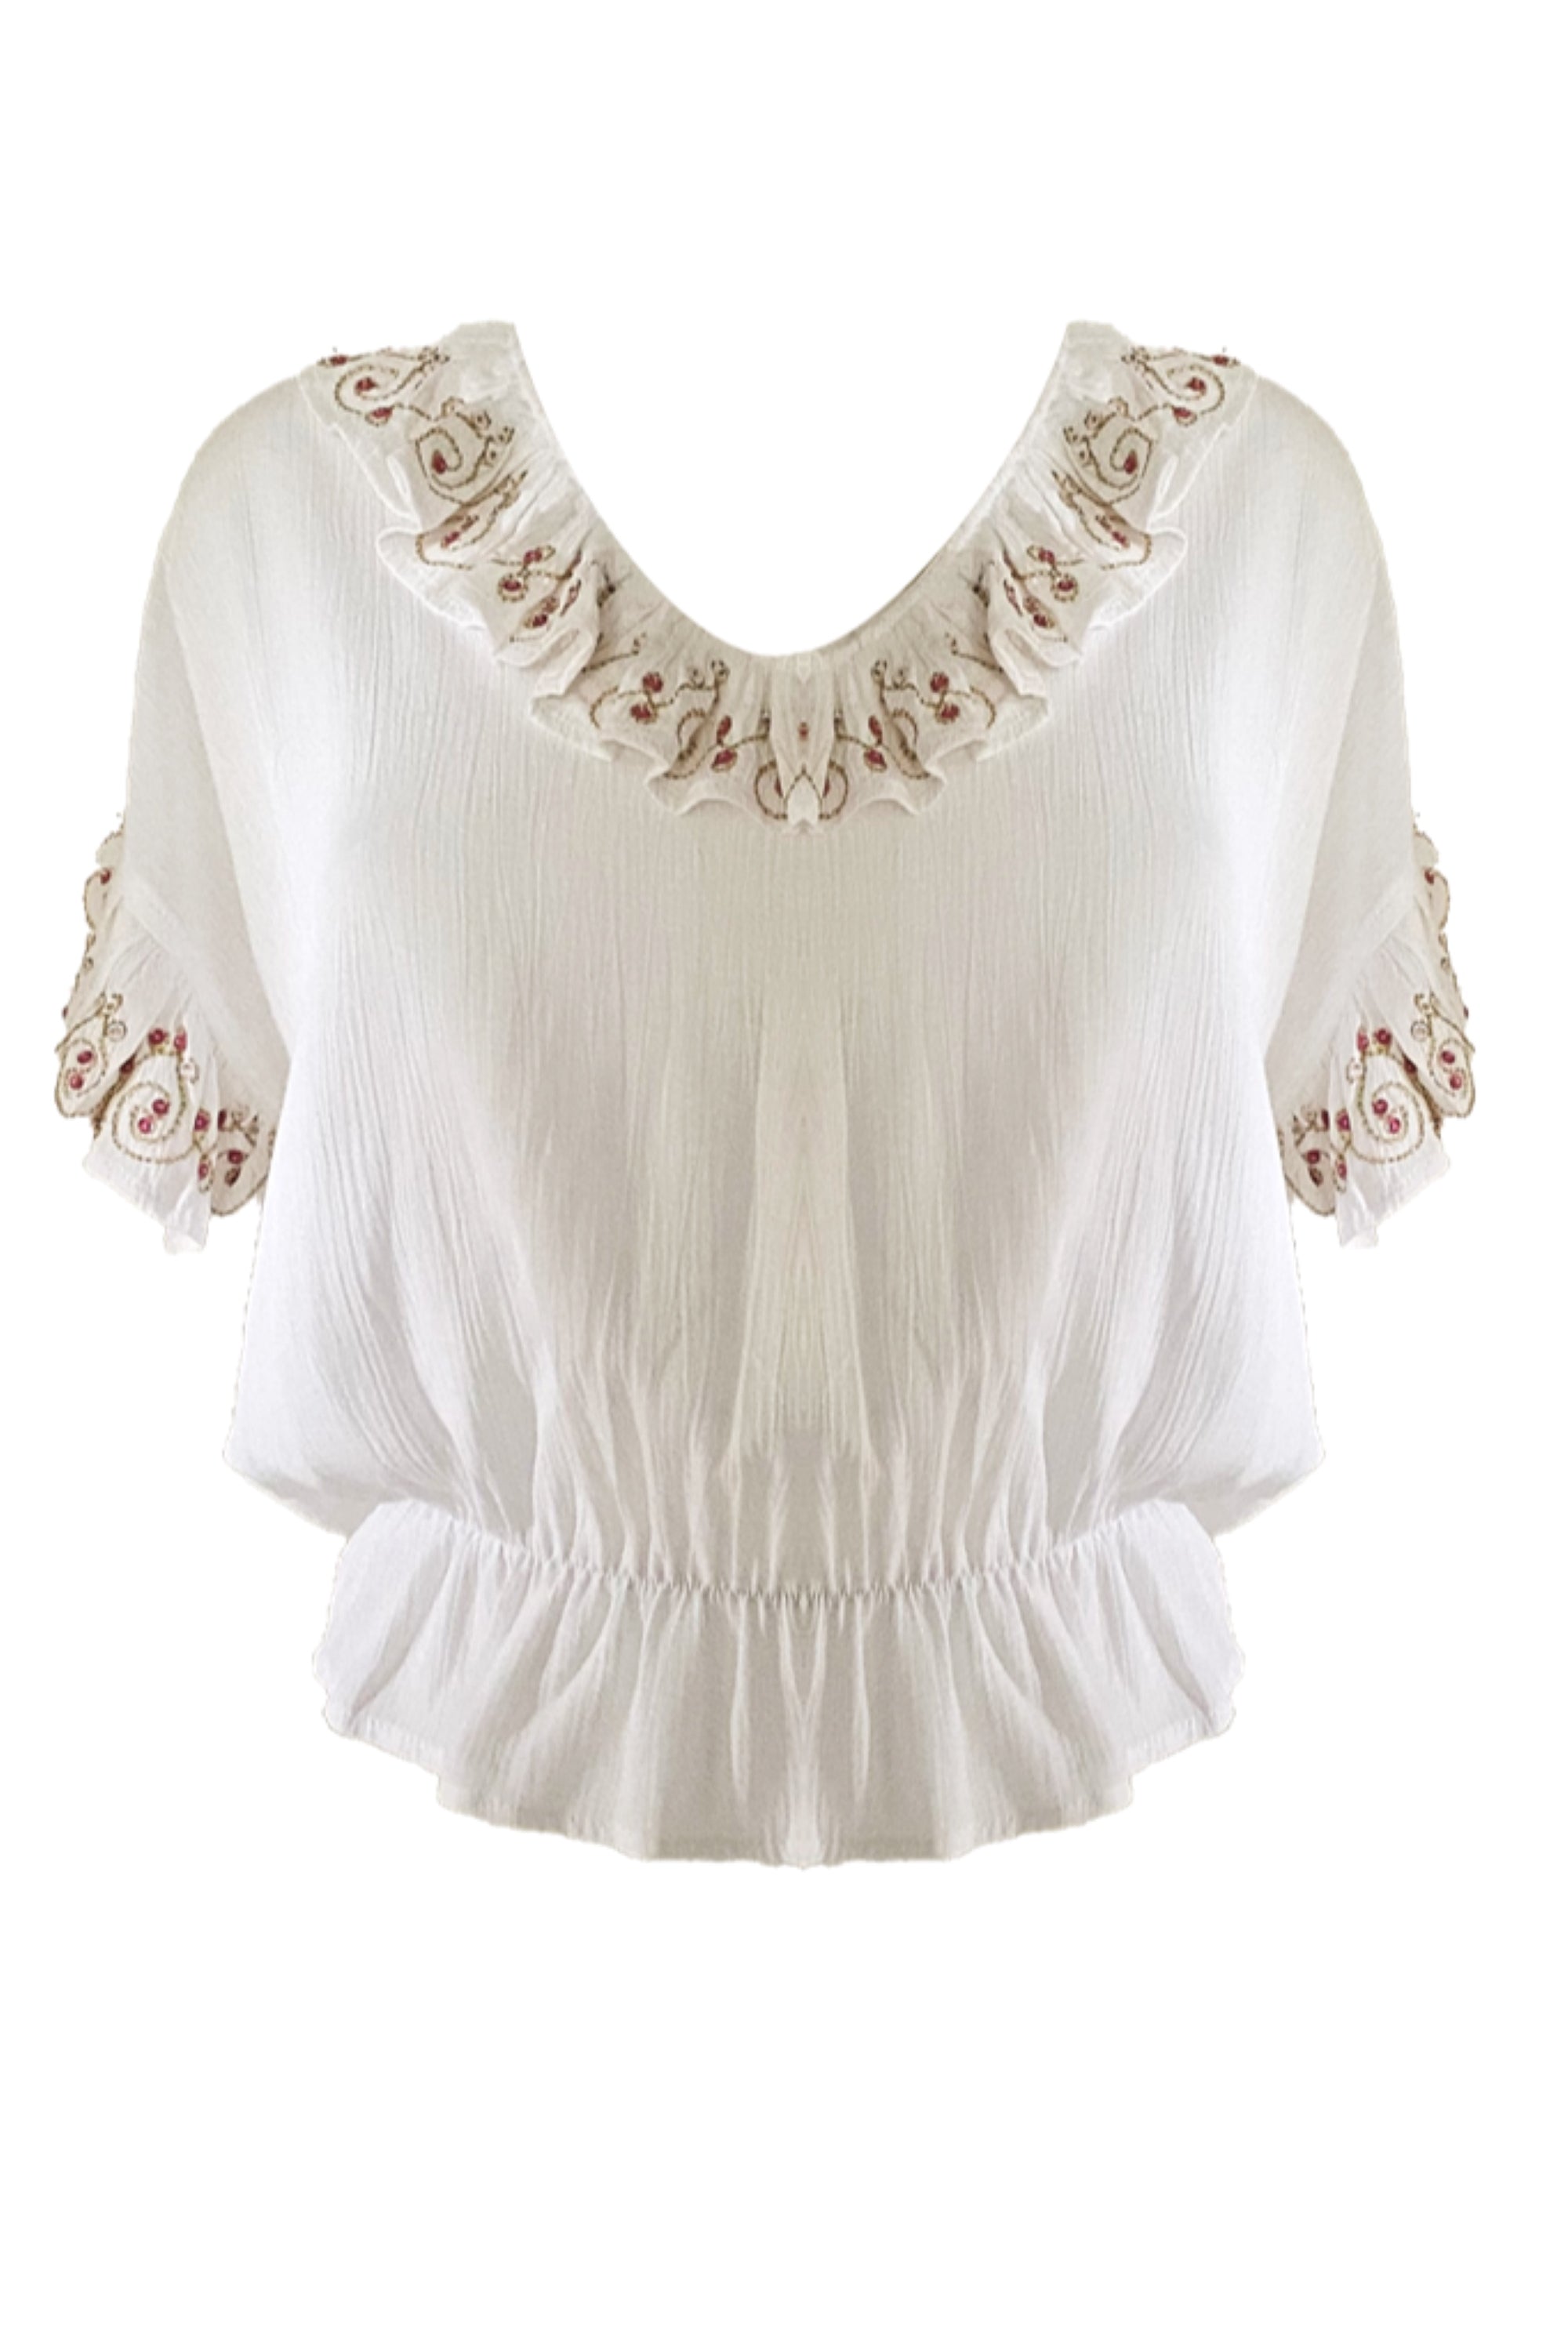 White cotton v neck holiday top with pink and gold embroidery called Lydia&nbsp;is a fabulous new shape of cotton white top to wear all summer and on holiday. Such a flattering holiday top as its loose and airy.